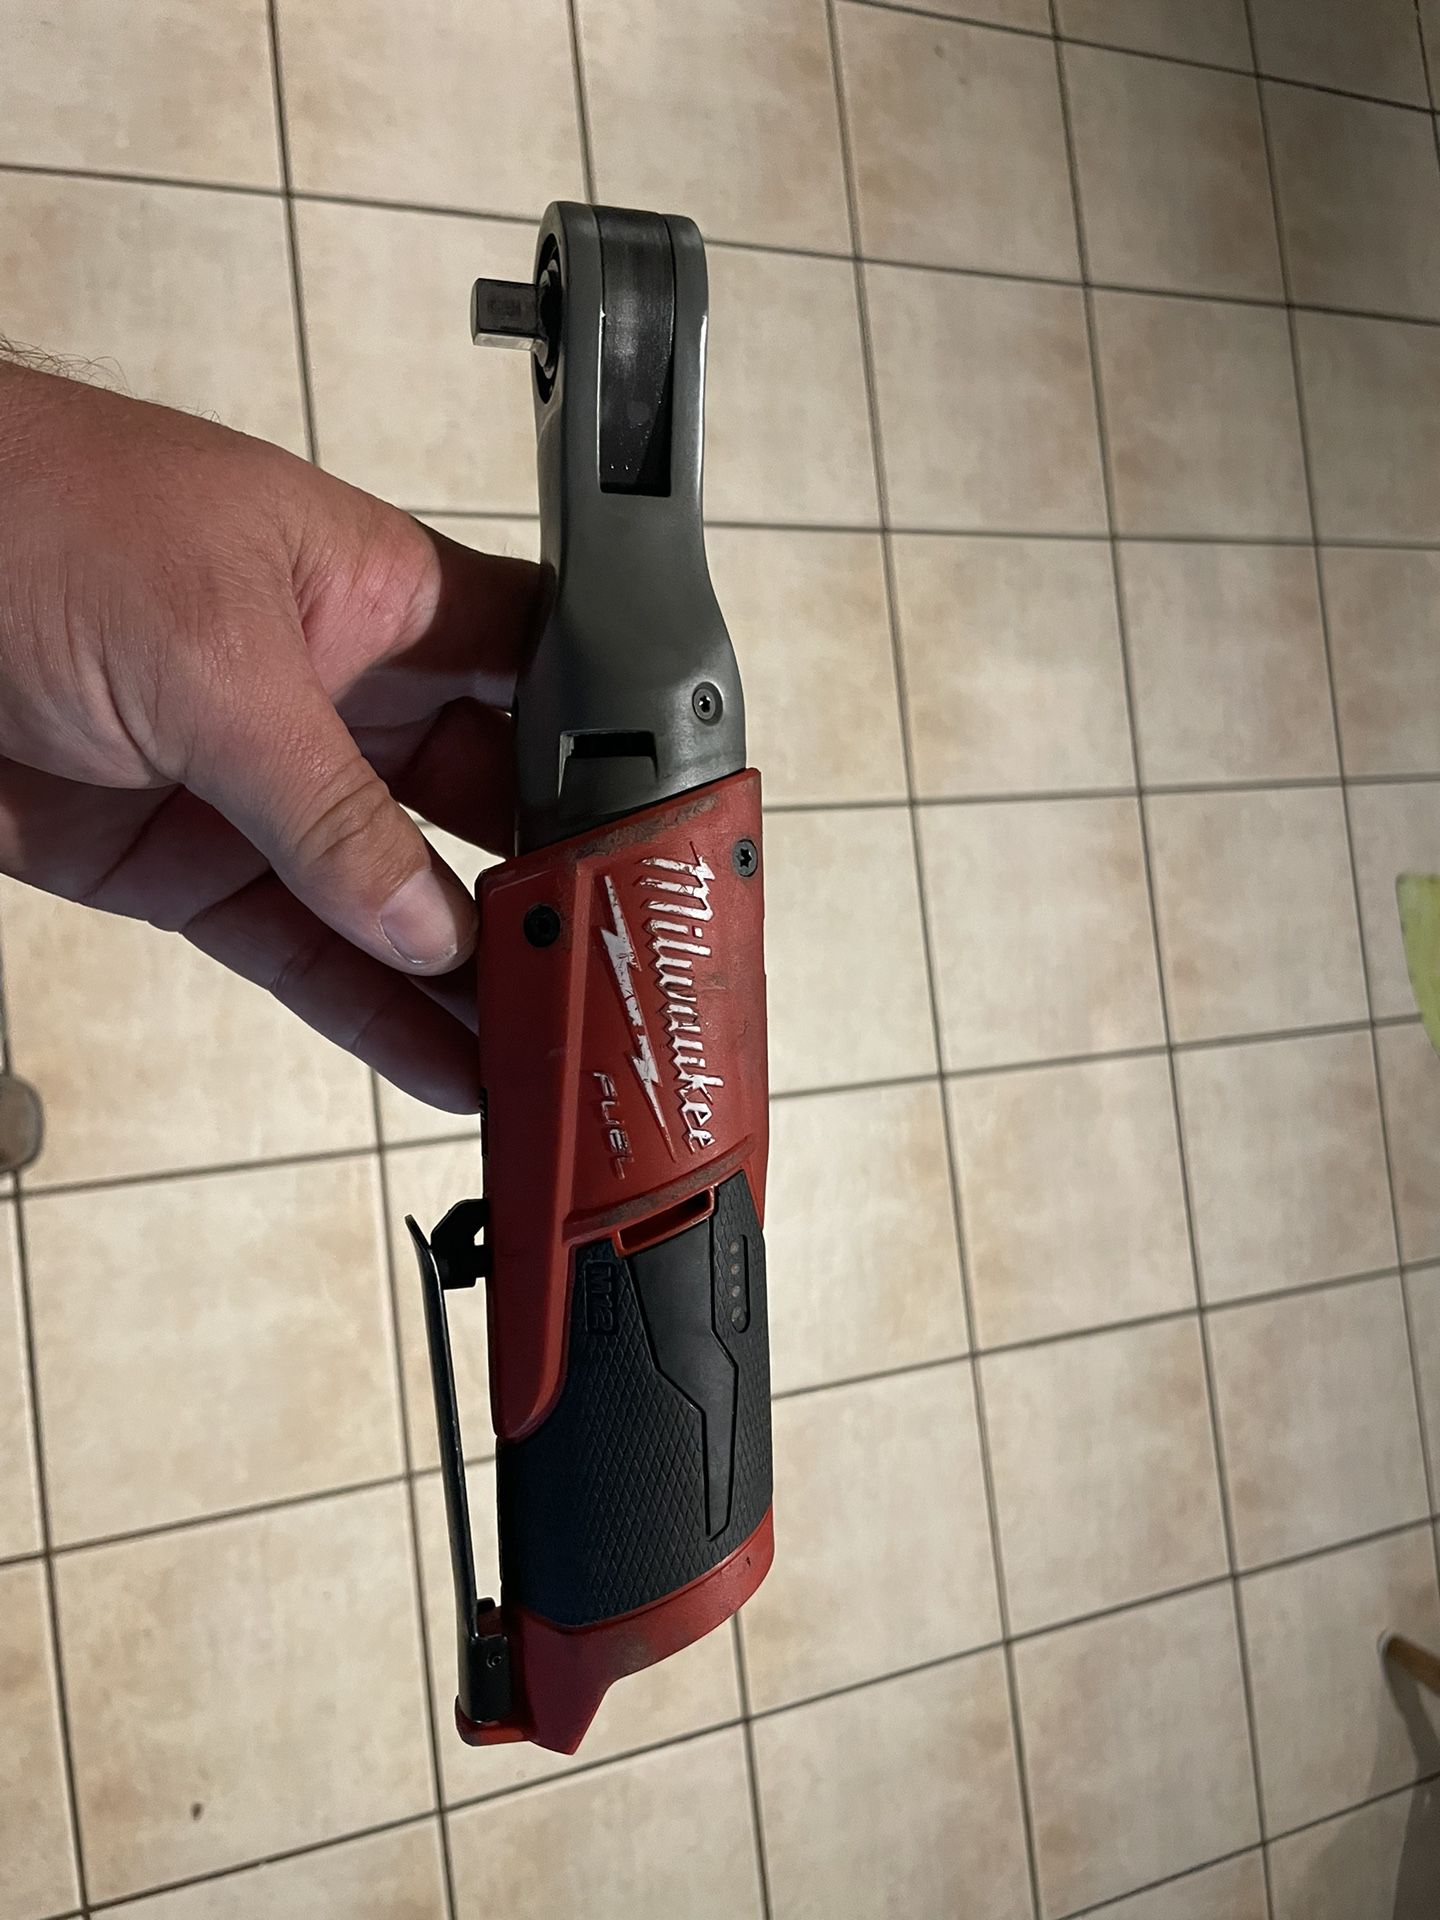 Milwaukee 12 V fuel 3/8” ratchet tool only used works great $120 firm in n Lakeland 